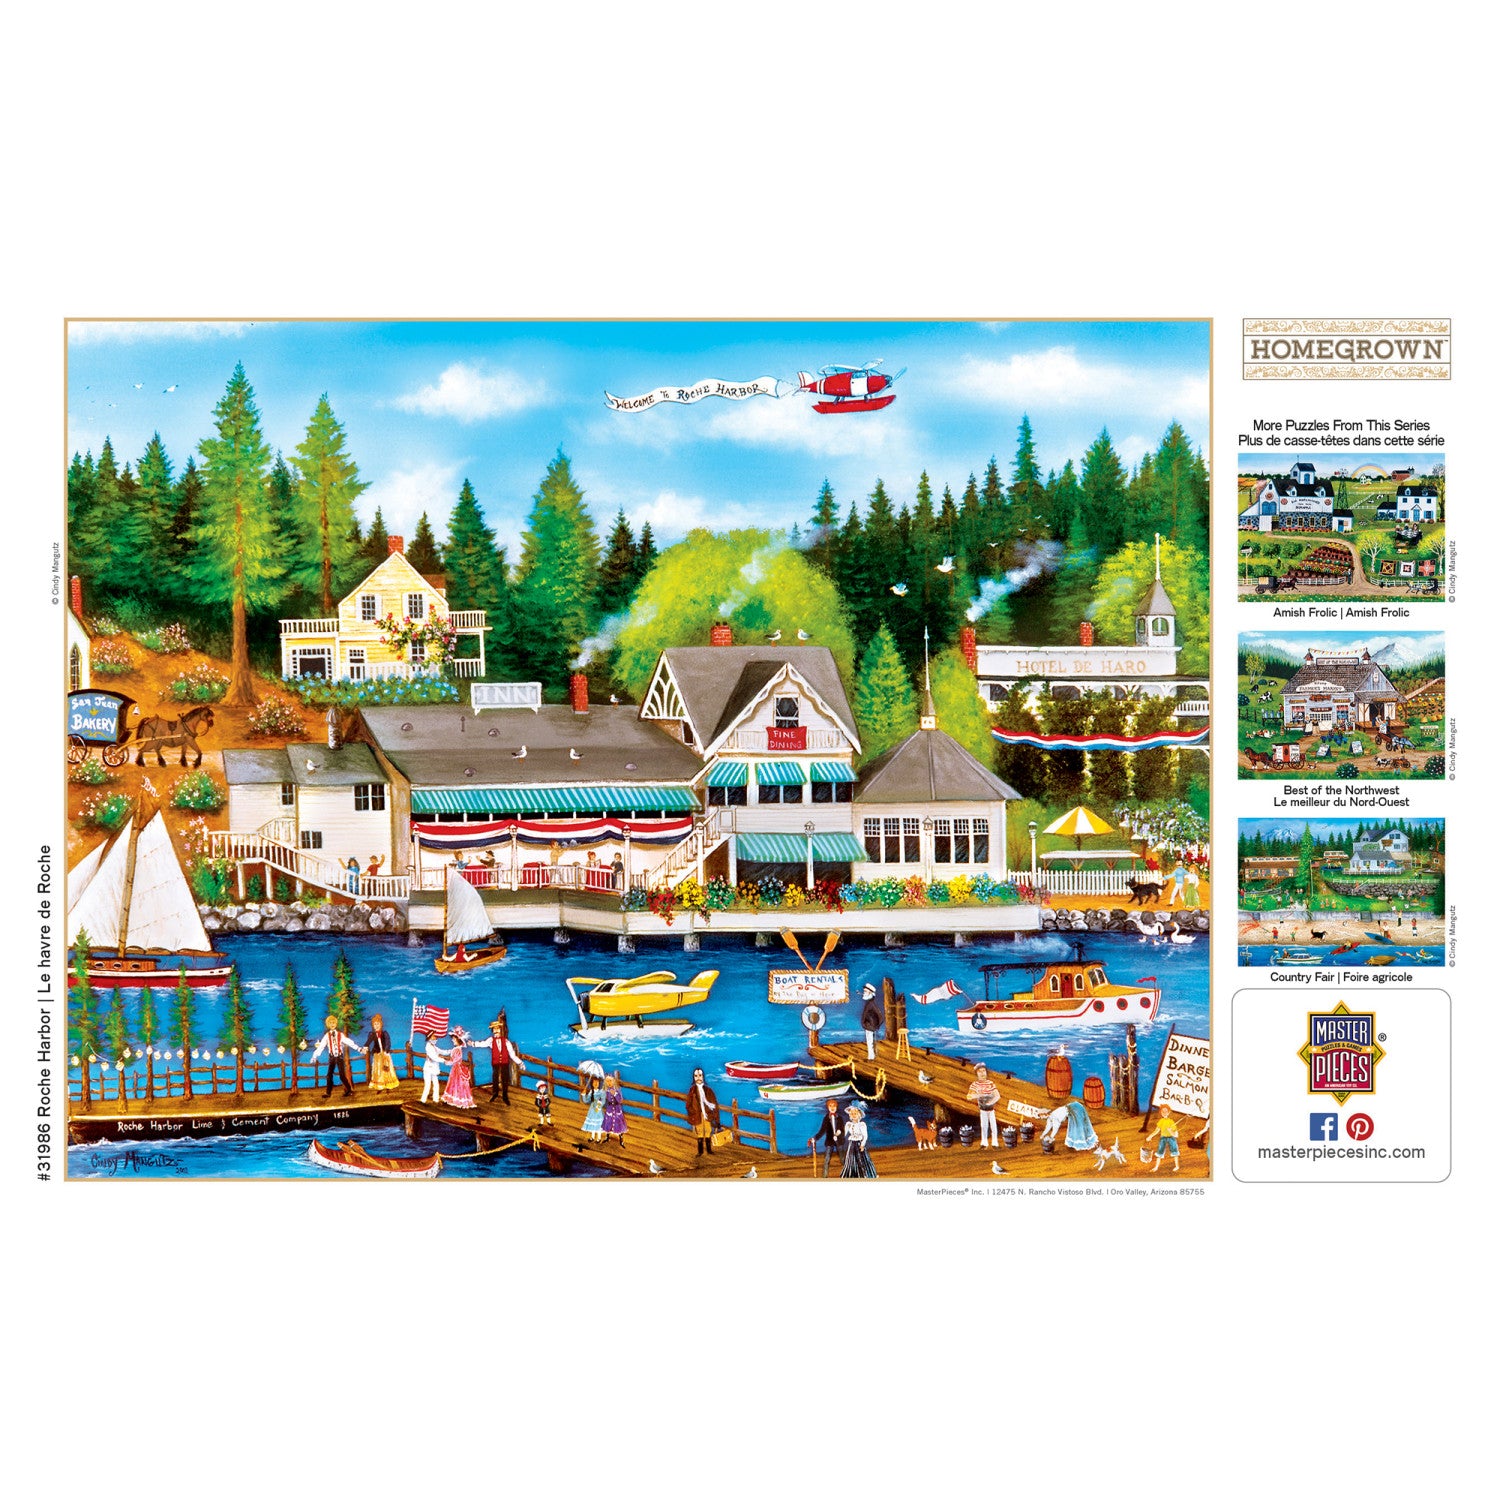 Homegrown - Roche Harbor 750 Piece Jigsaw Puzzle